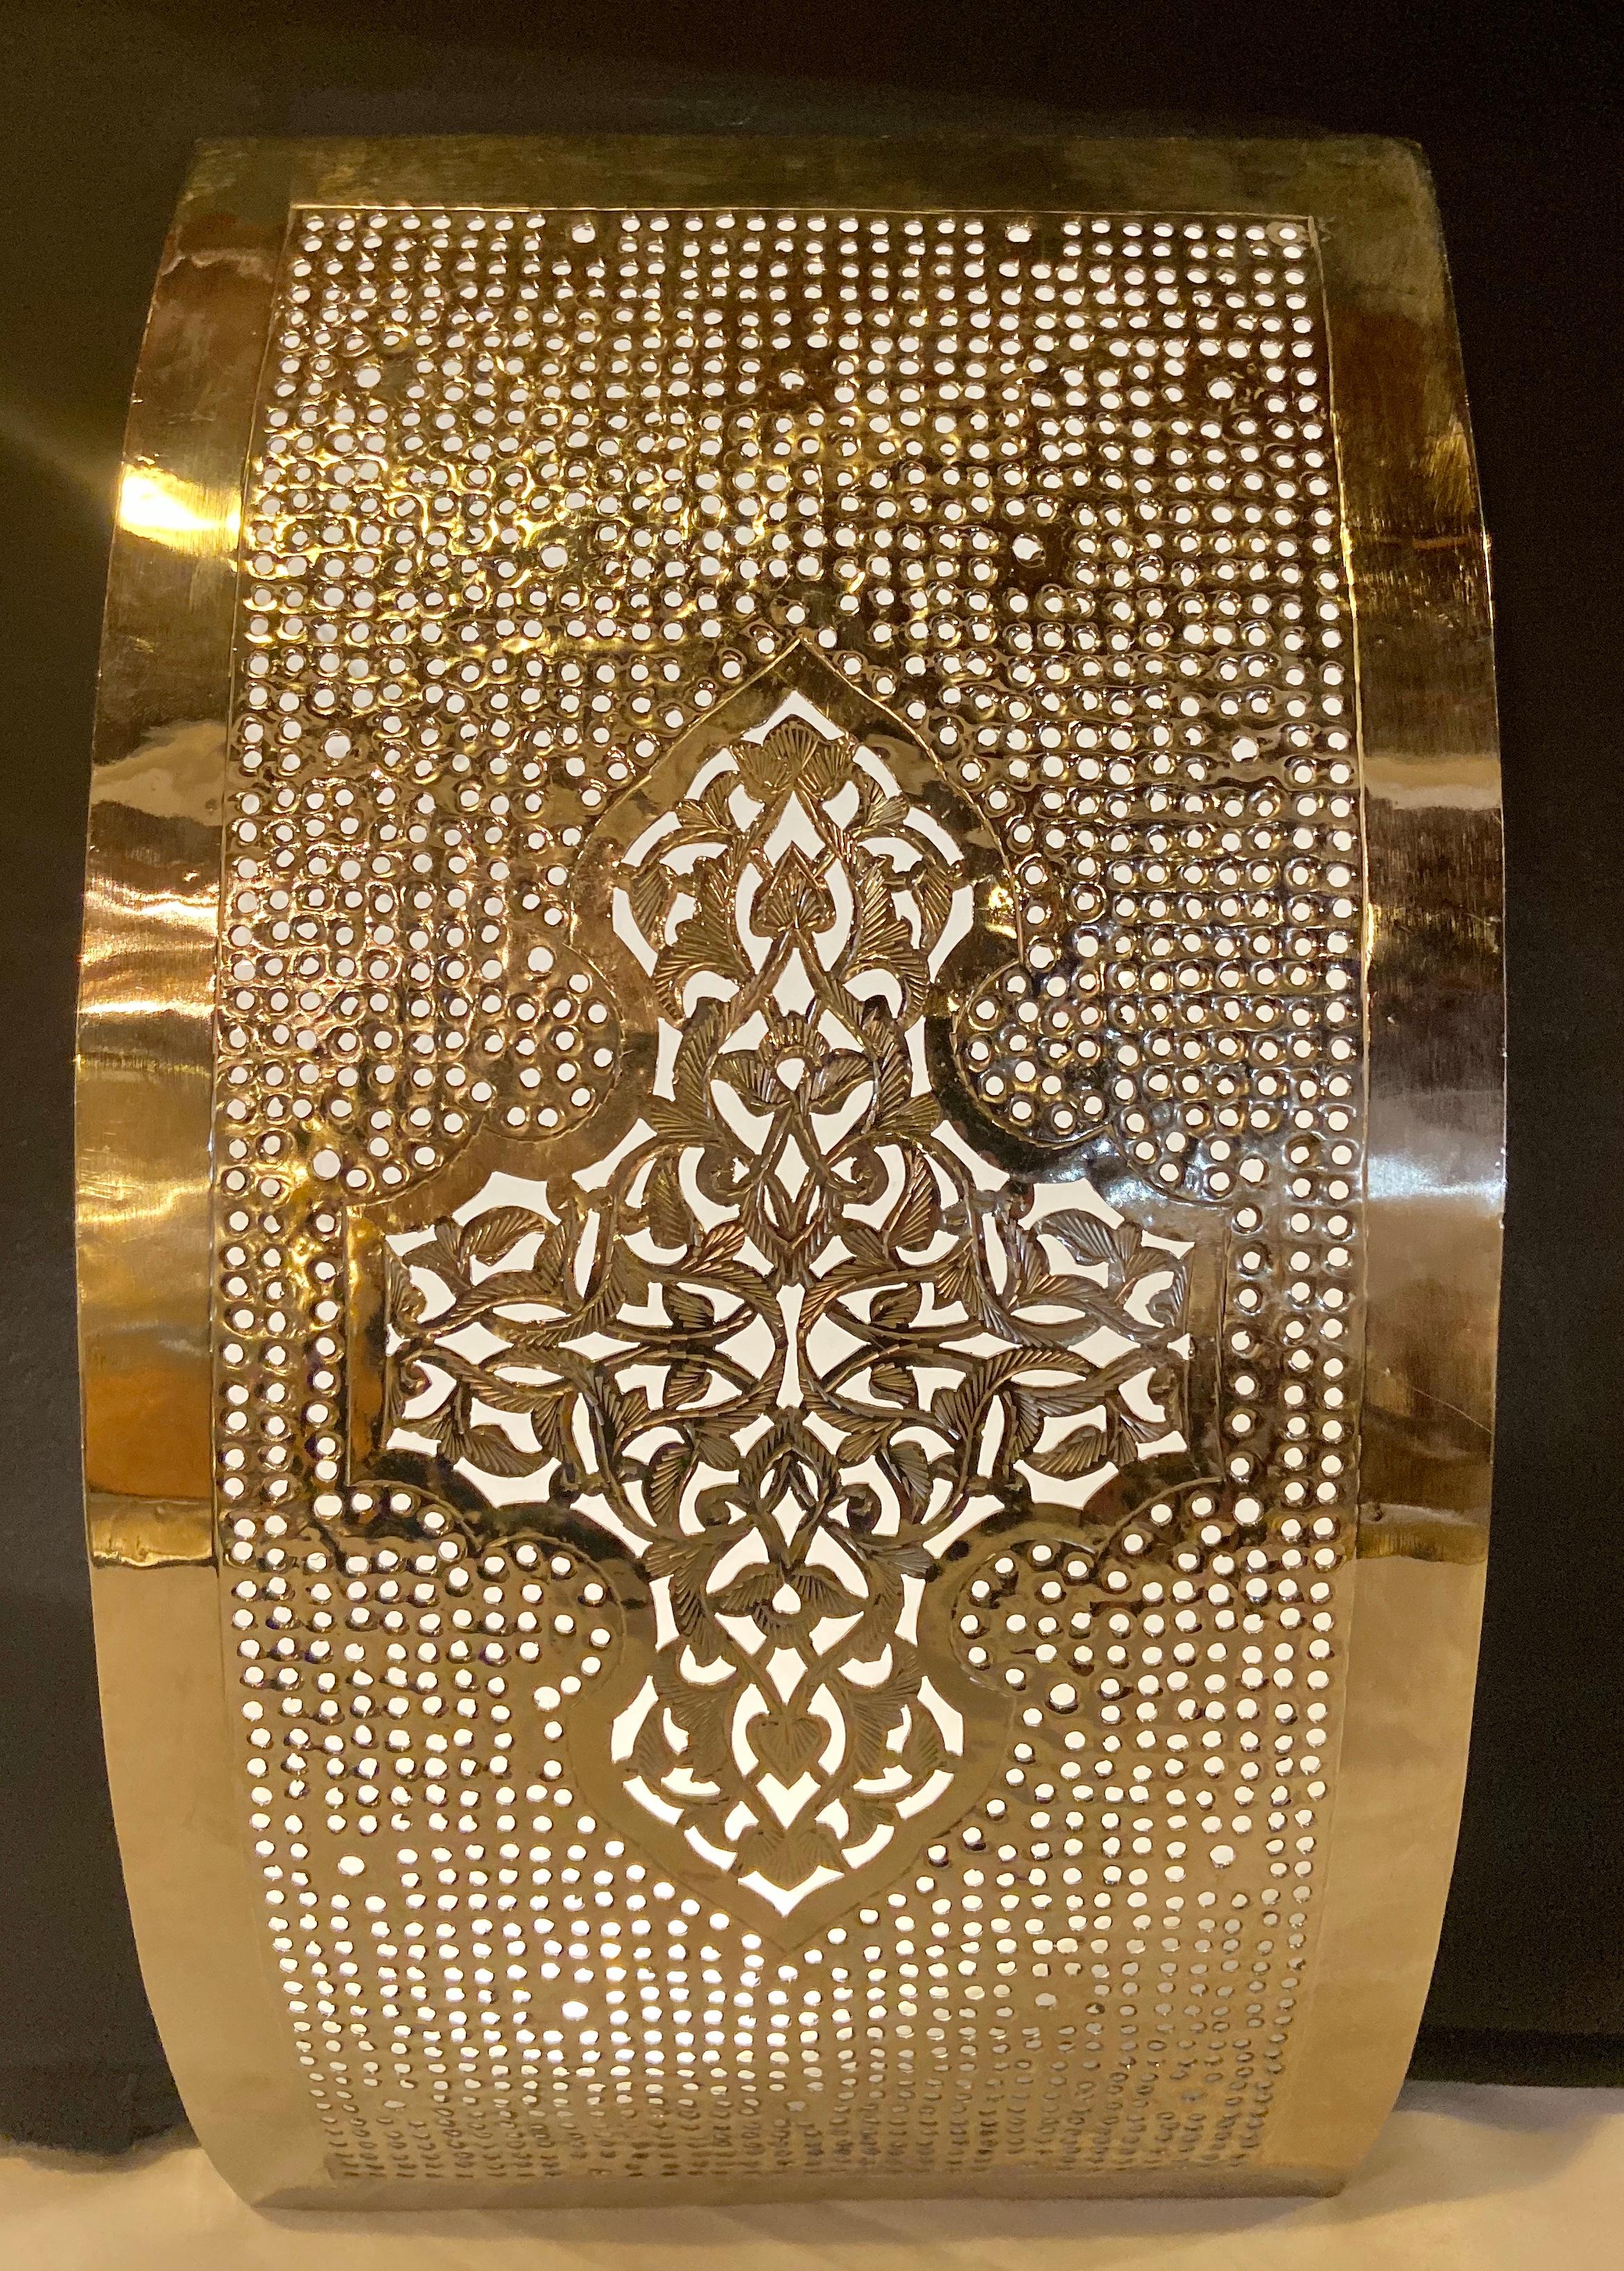 The pair of handmade Moroccan design white brass wall lanterns or sconces features exquisite filigree work that will elevate the ambiance of any room.This wall-mounted sconce emits a soft, filtered light. The wall lanterns or scones are not wired as